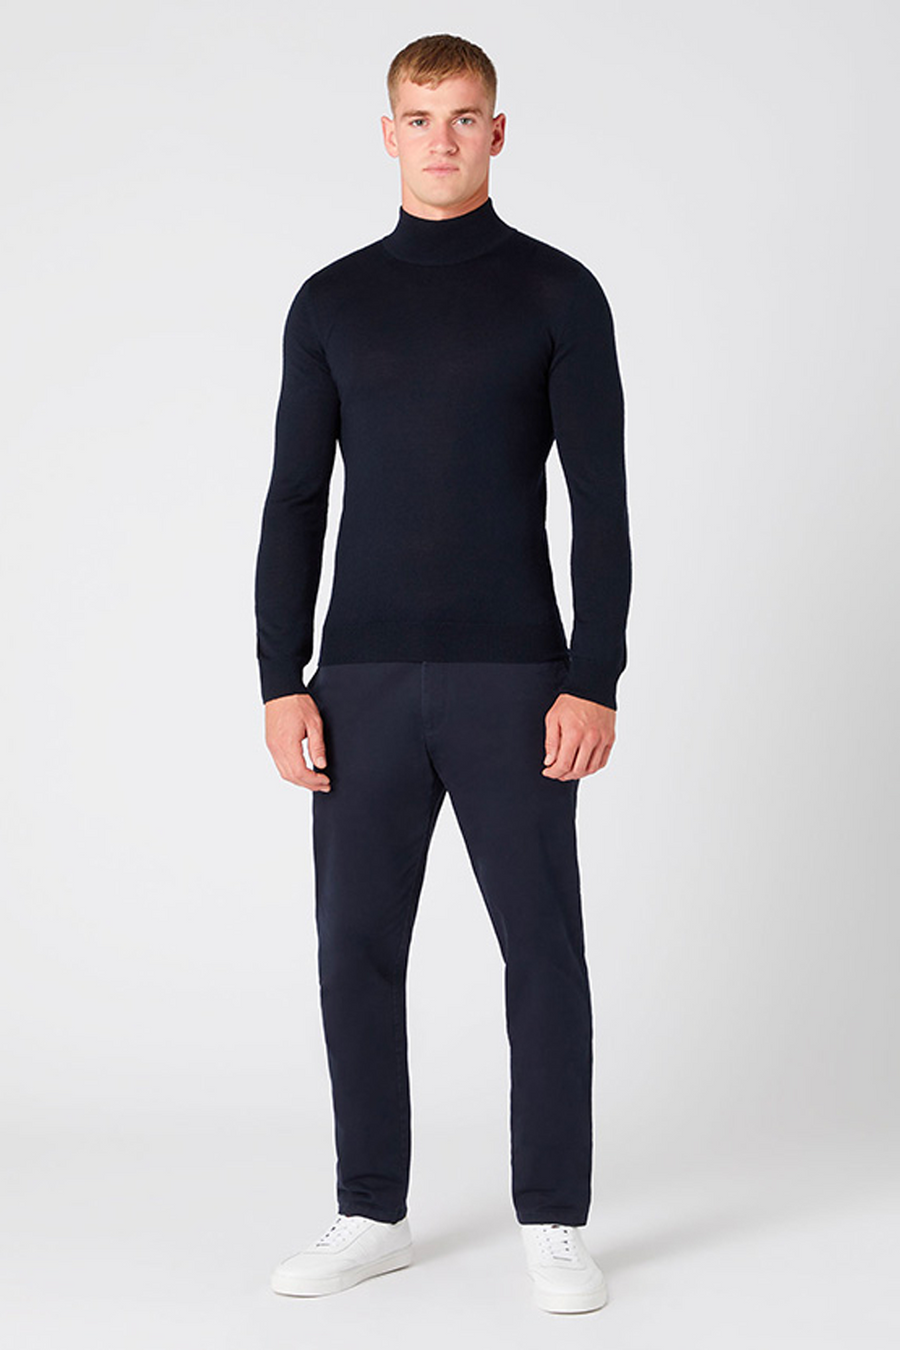 Buy the Remus Uomo L/S Turtle Neck Knitwear Navy at Intro. Spend £50 for free UK delivery. Official stockists. We ship worldwide.